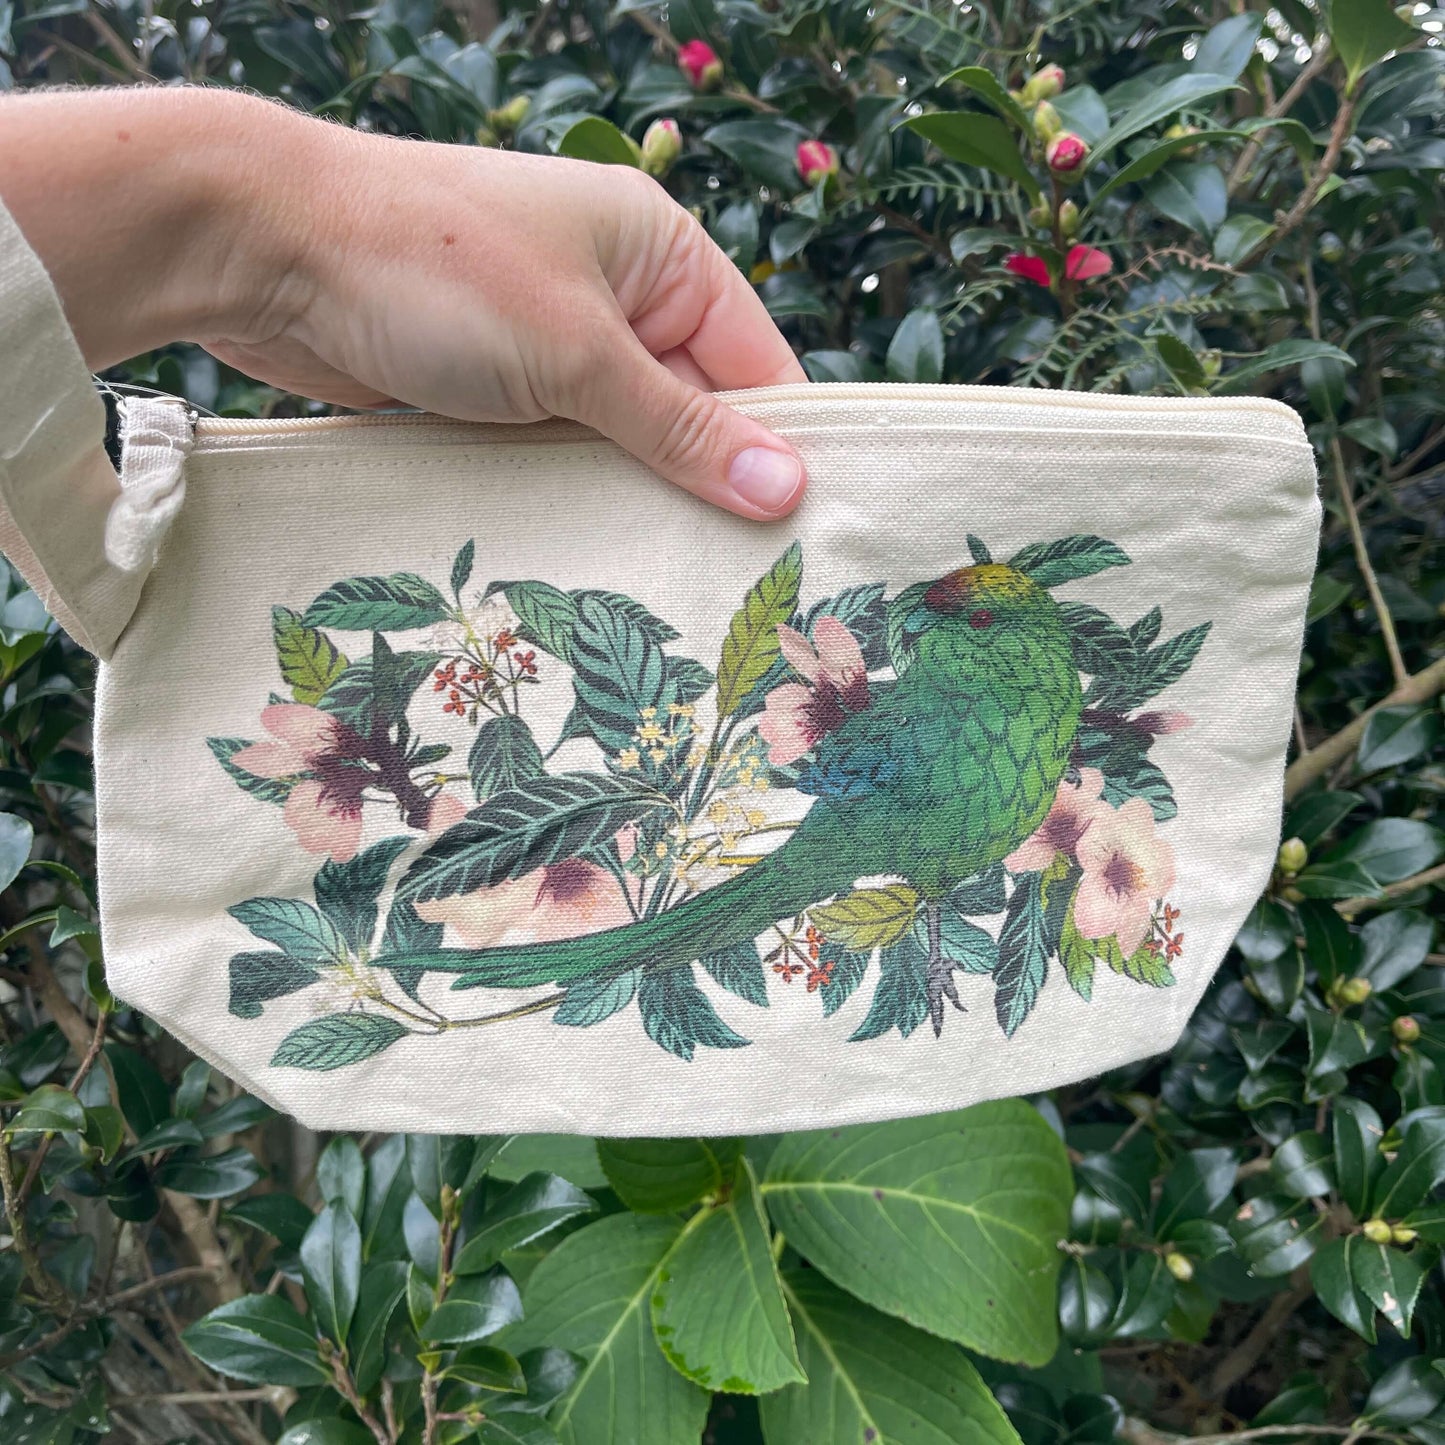 Womens hand holding a cotton clutch with vibrant Parakeet print.